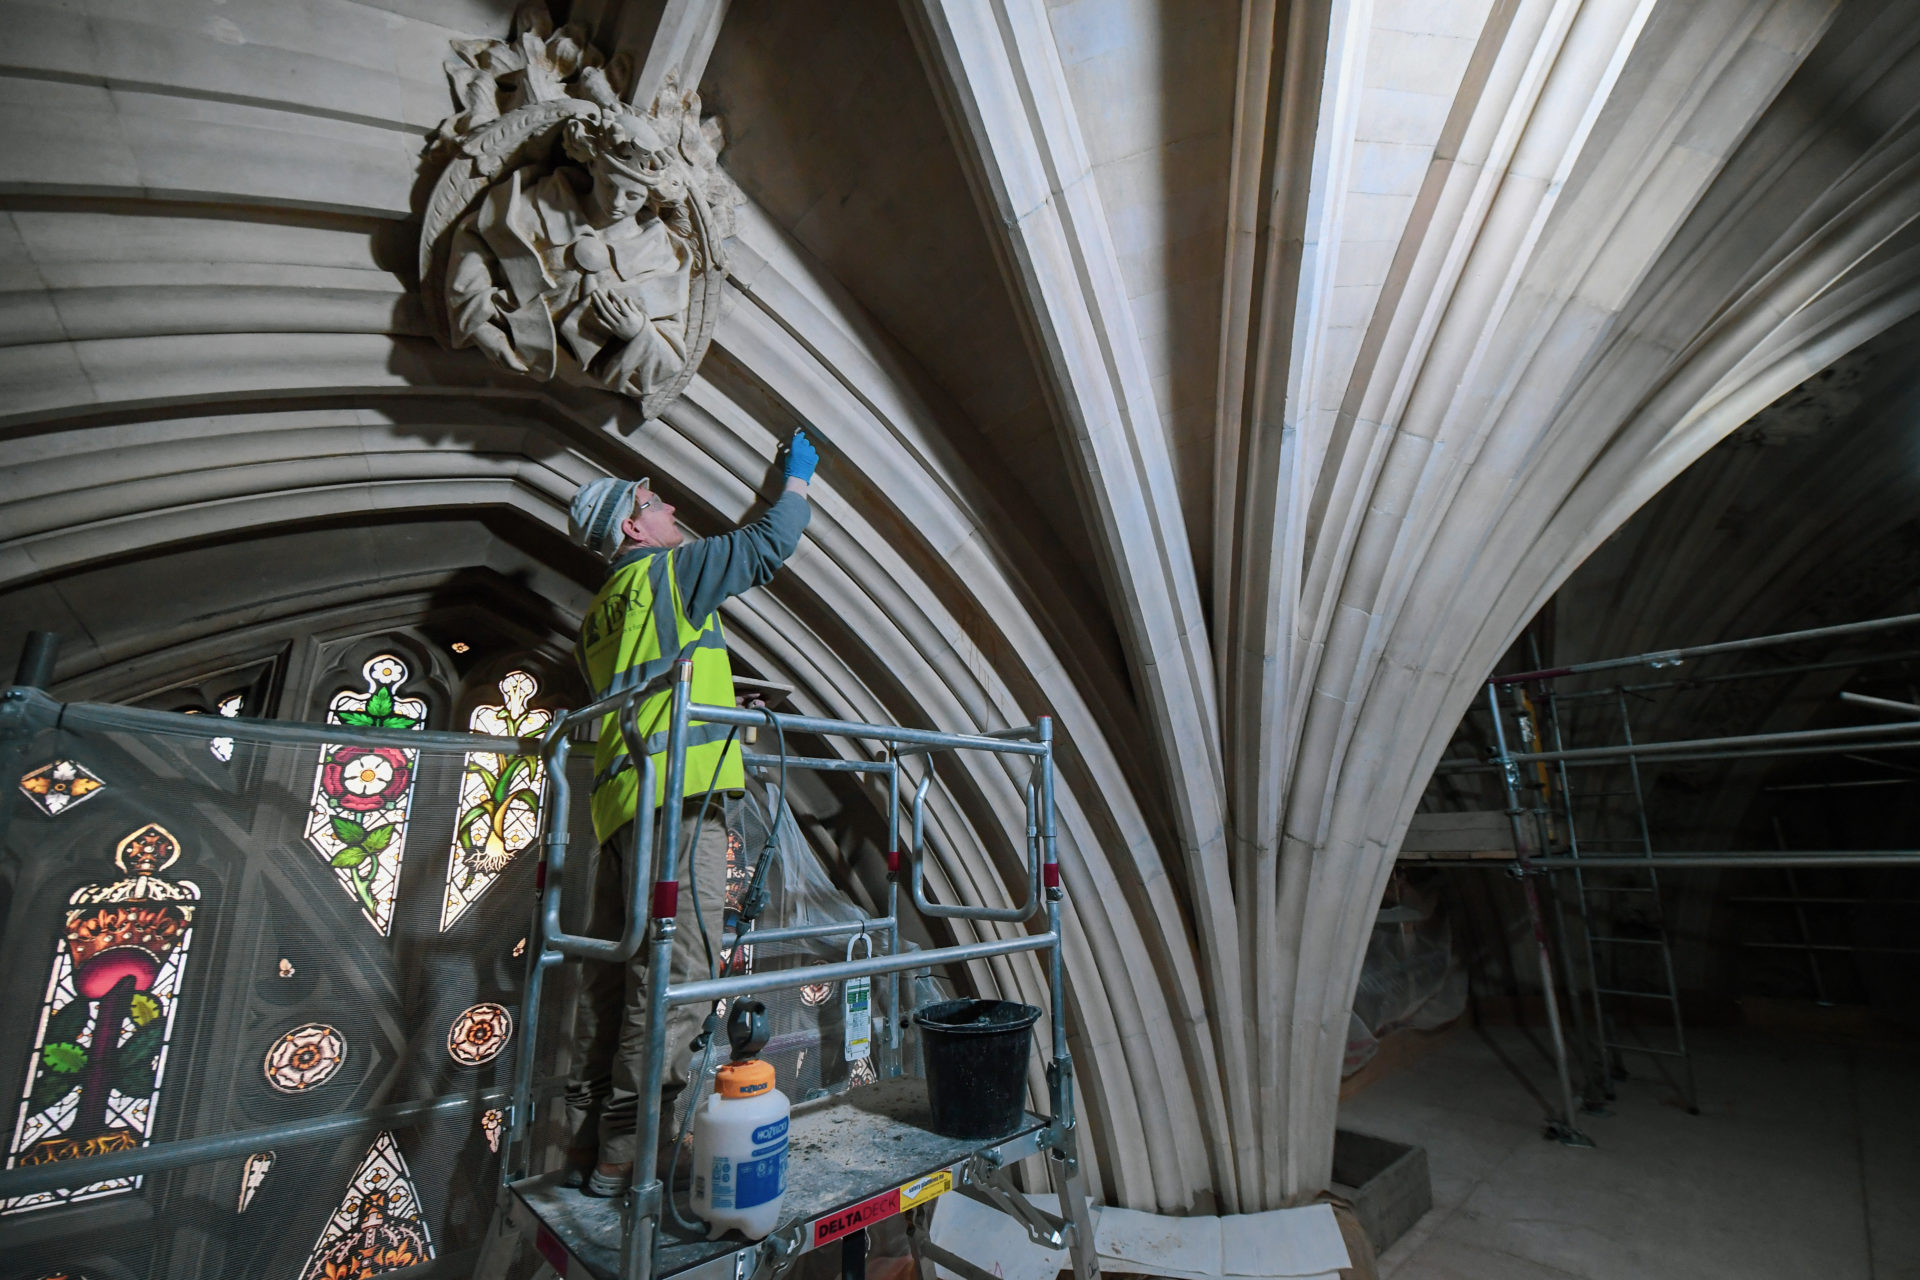 A stonemason working to restore stonework in St Stephen's Hall in the Houses of Parliament (Image: ©UK Parliament/Jessica Taylor)